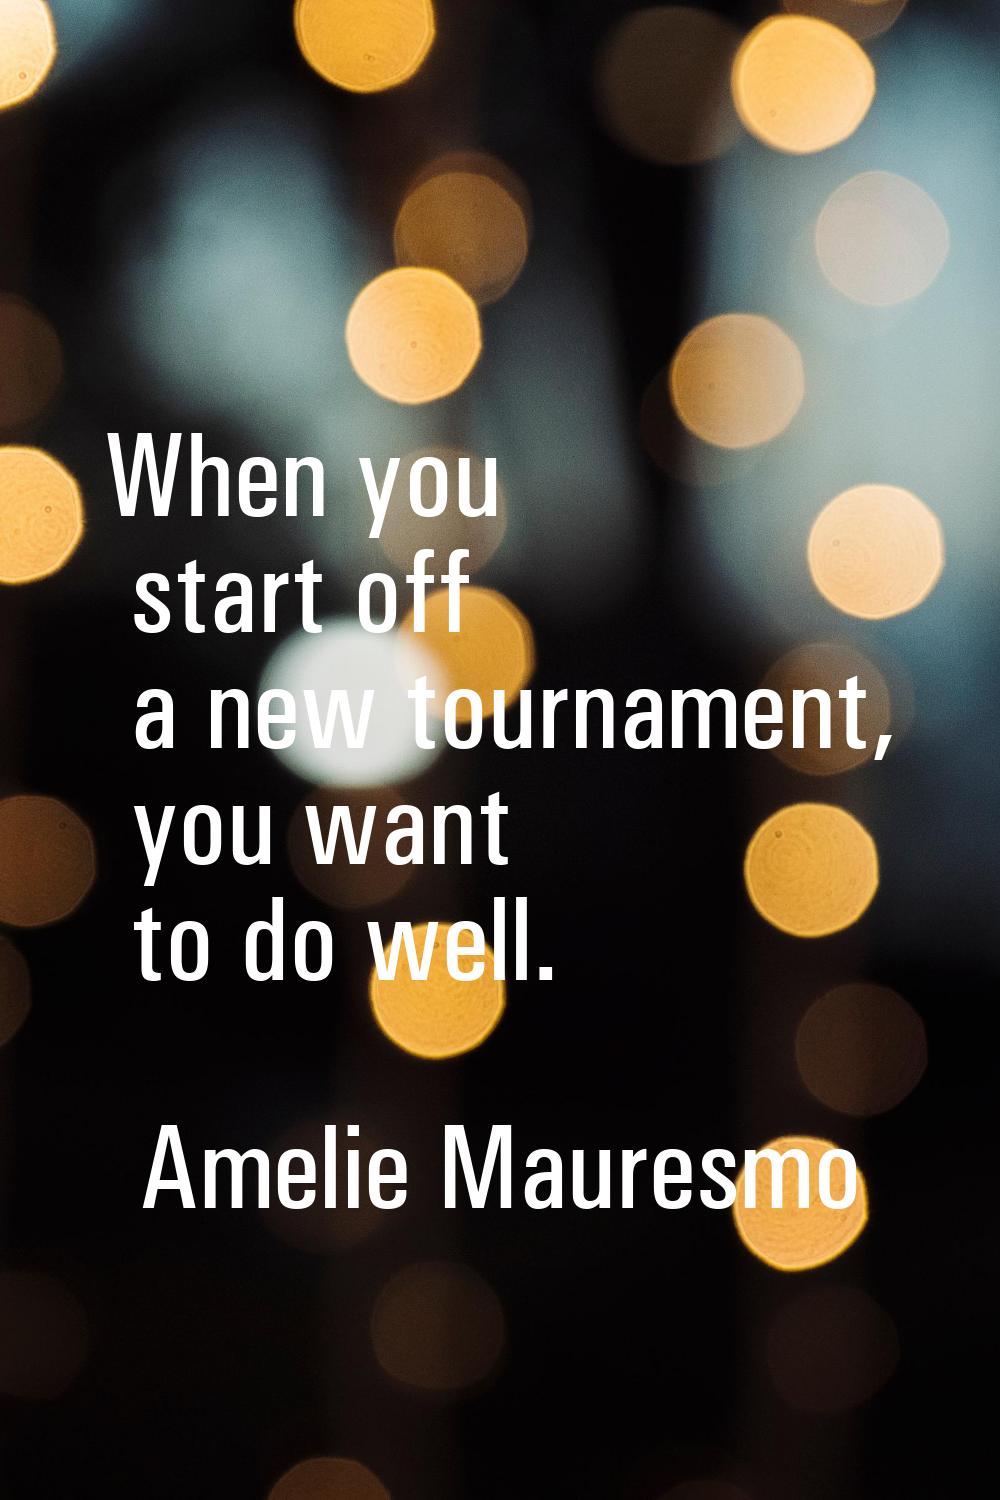 When you start off a new tournament, you want to do well.